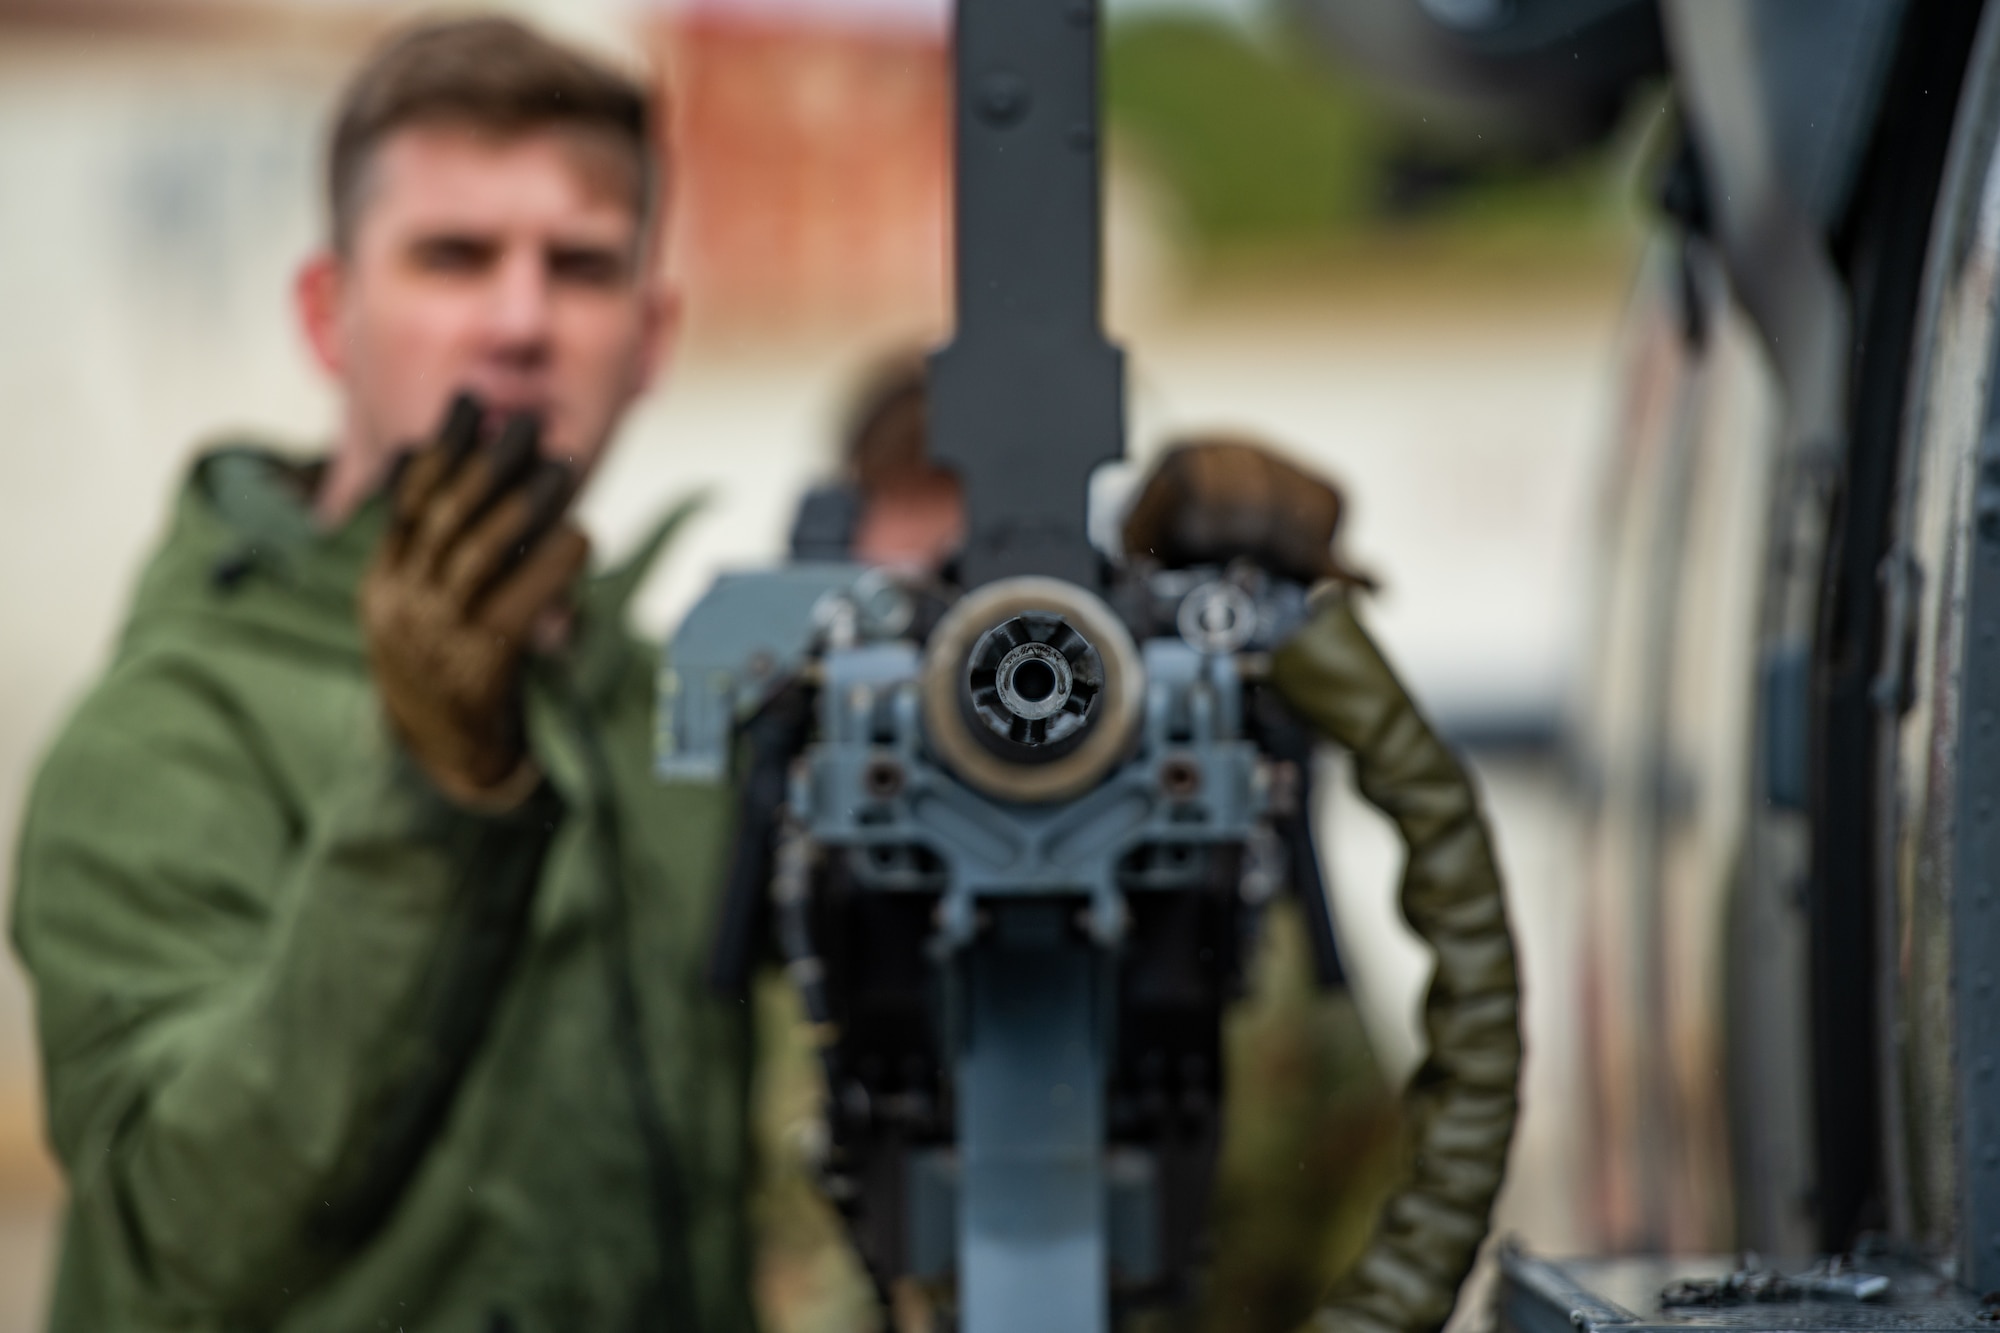 A U.S. Air Force member checks the gun on the side of a helicopter